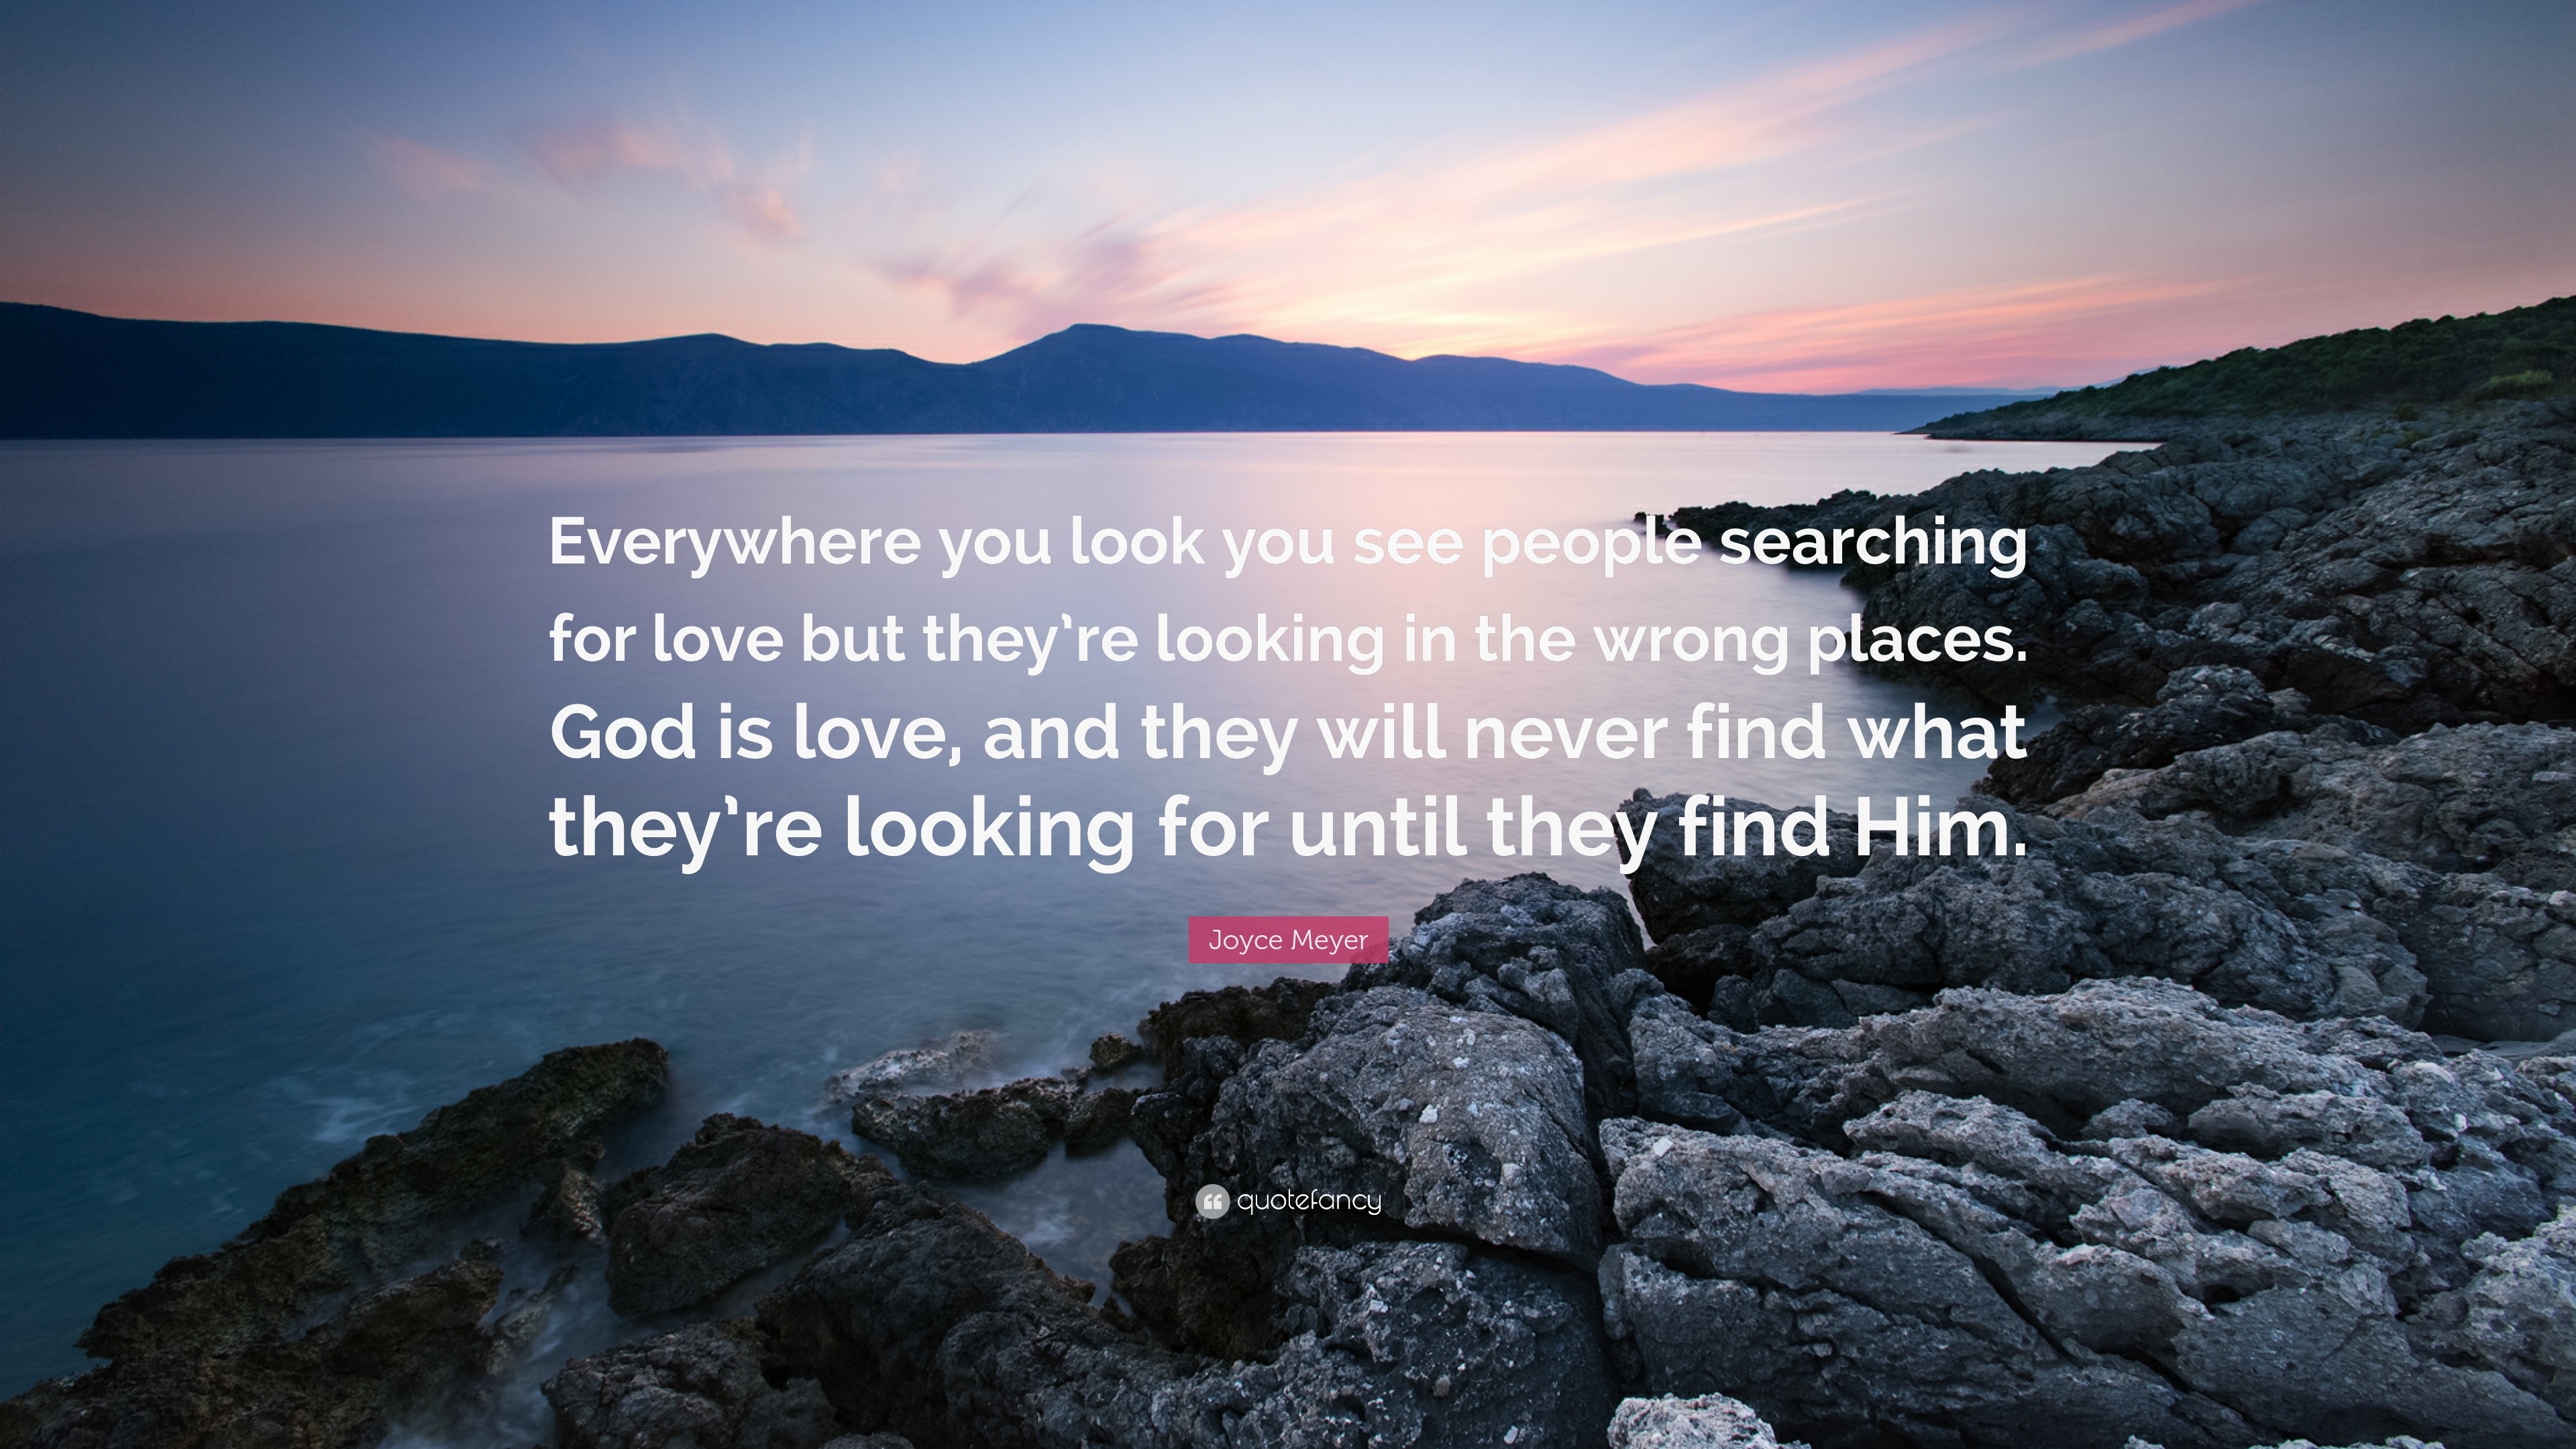 Joyce Meyer Quote: “Everywhere you look you see people searching for love  but they're looking in the wrong places. God is love, and they wil”